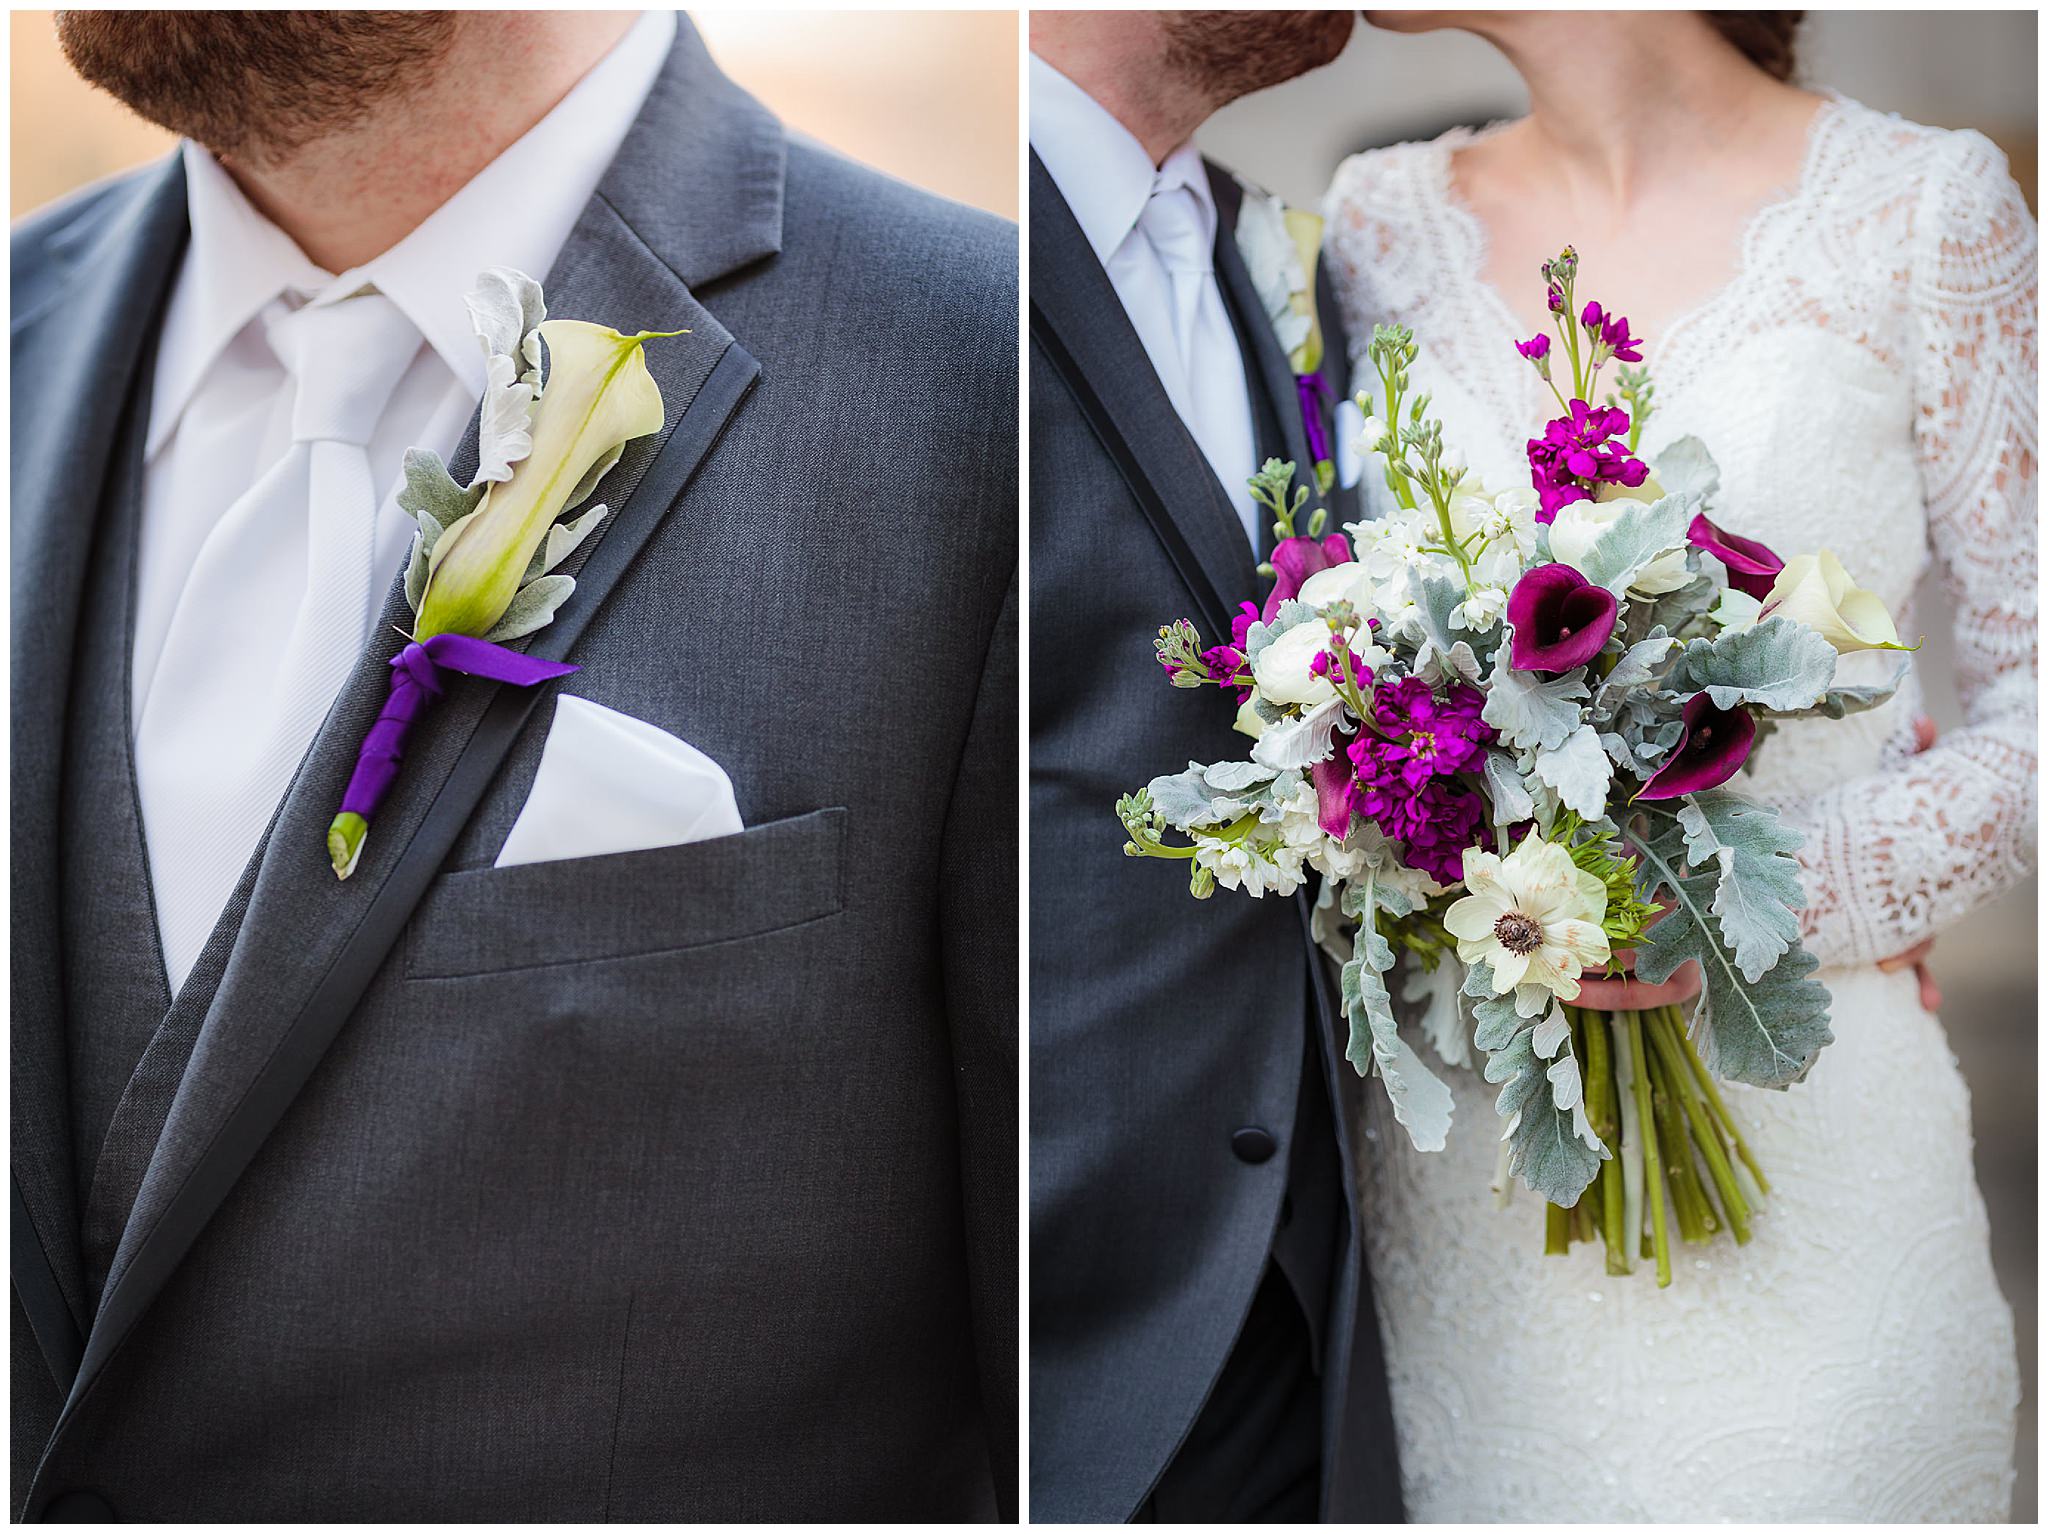 White calla lily boutonniere and purple and white bouquet by Holly Hanna Floral in Pittsburgh